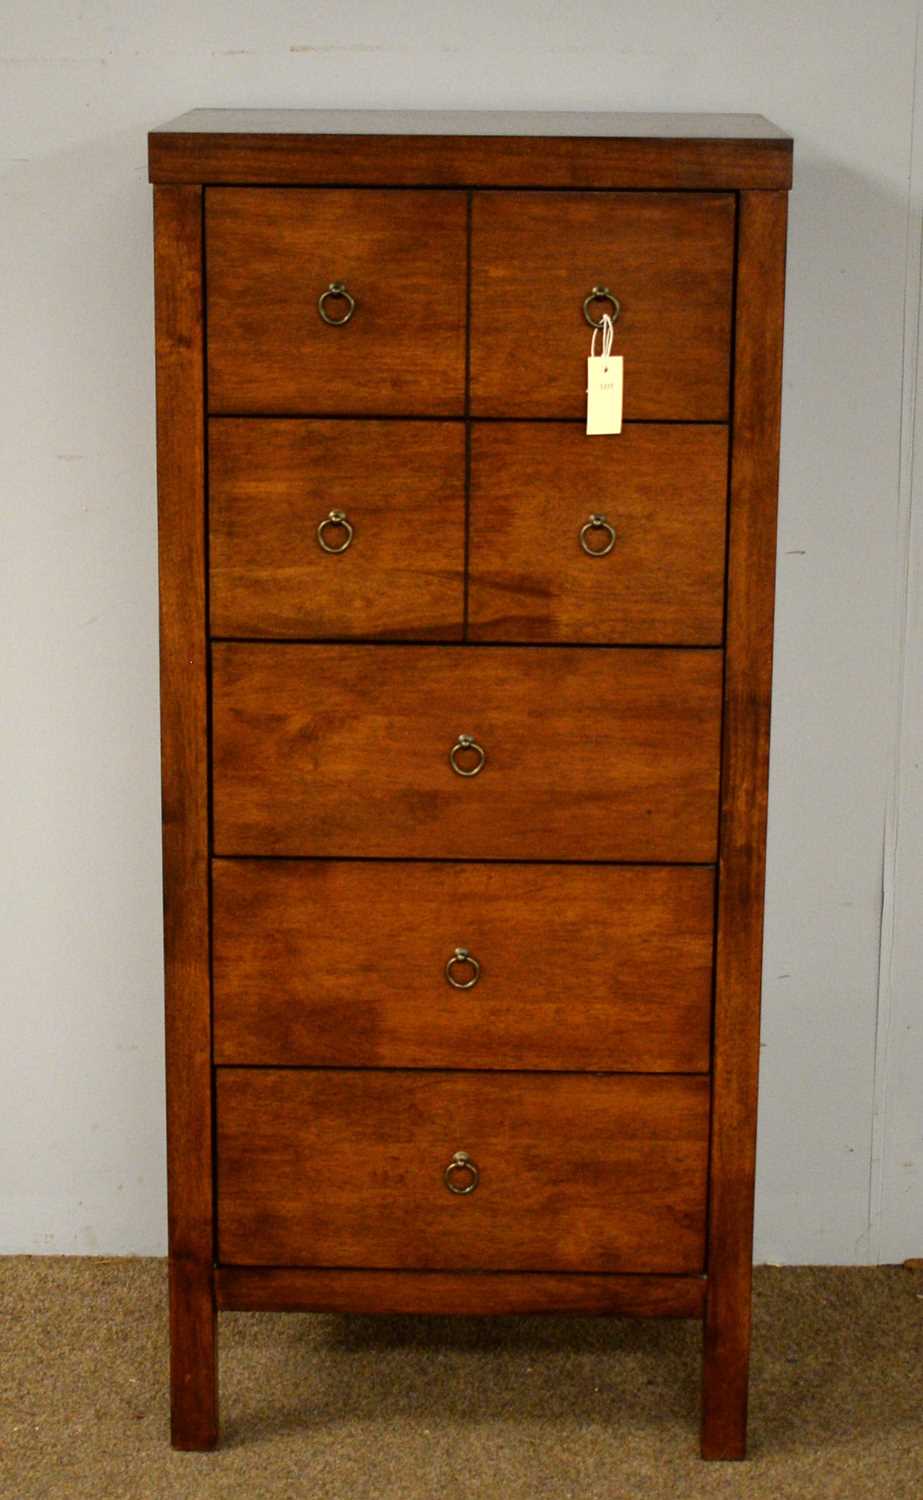 A contemporary stained wood chest of drawers